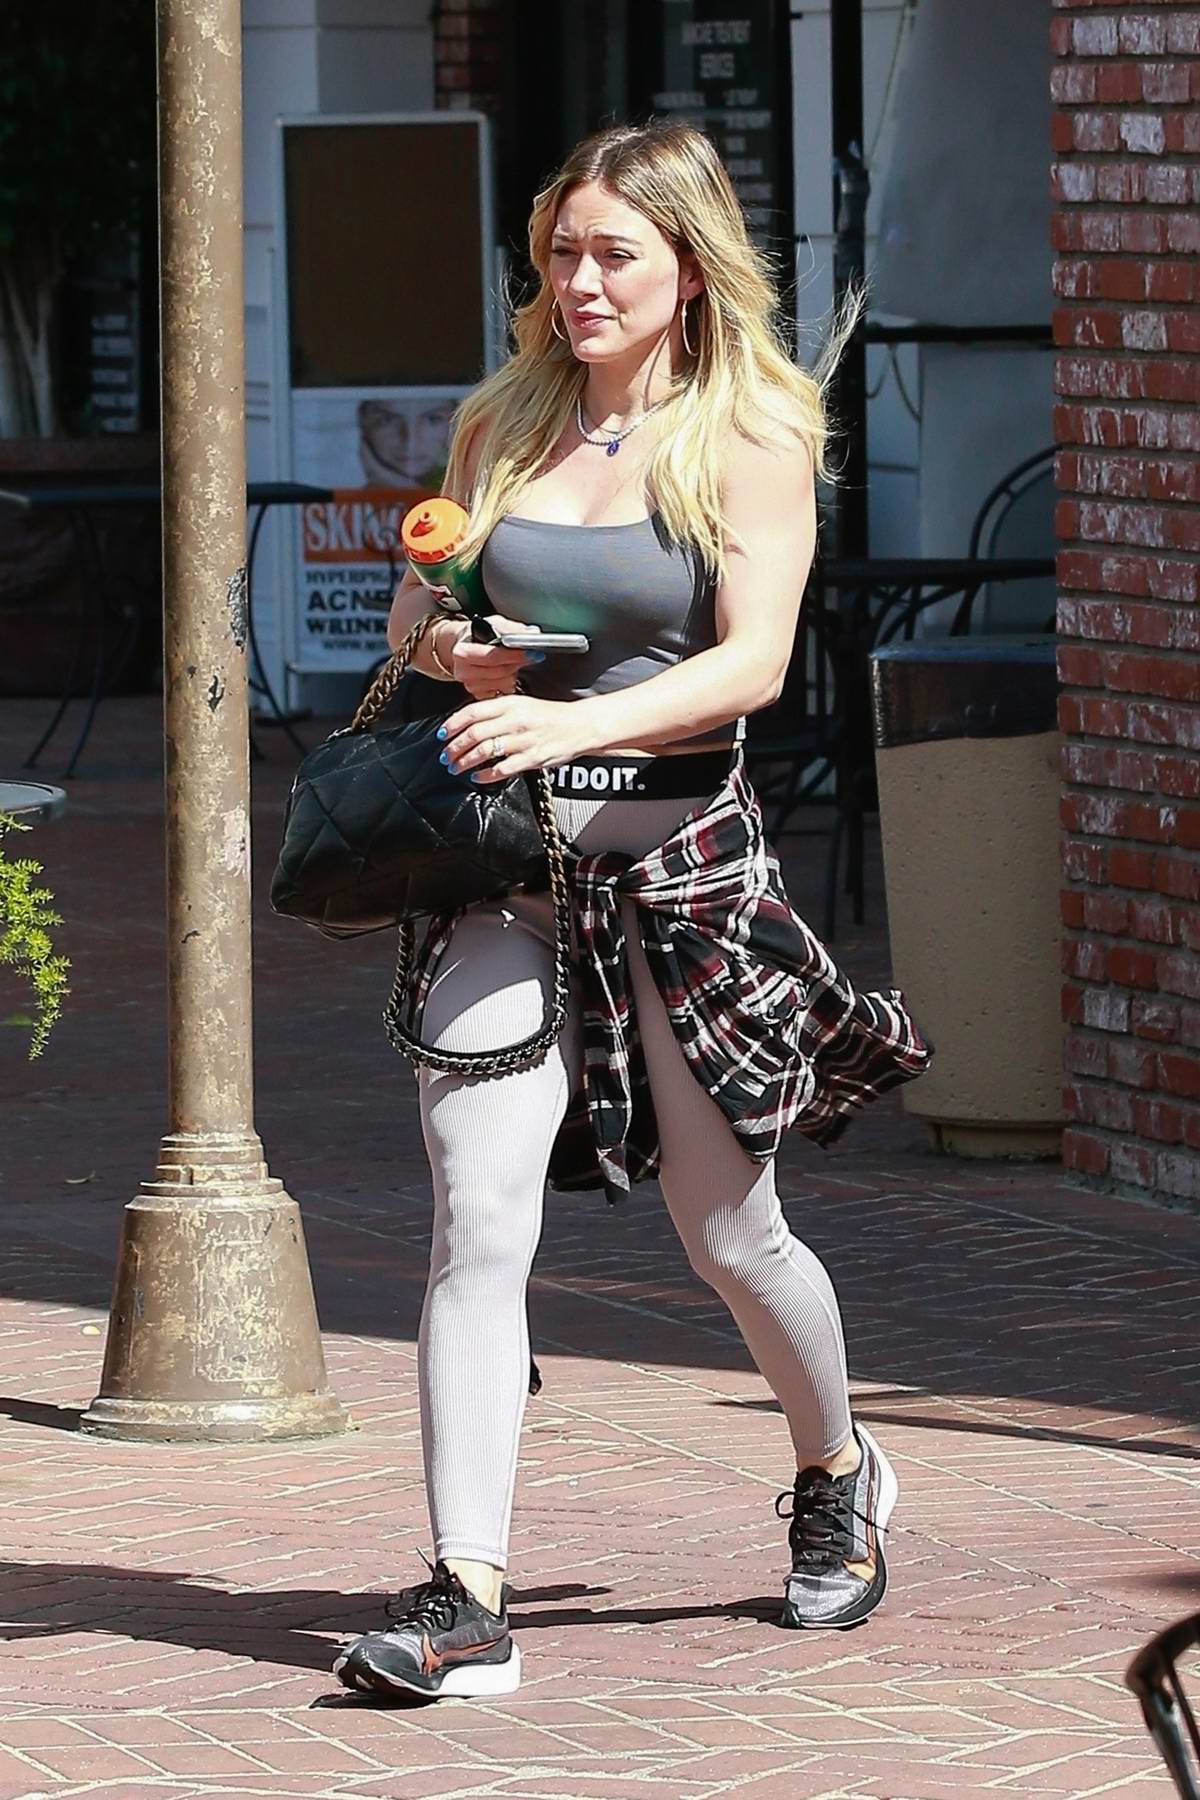 Hilary Duff looks great in Nike leggings and a grey tank top as